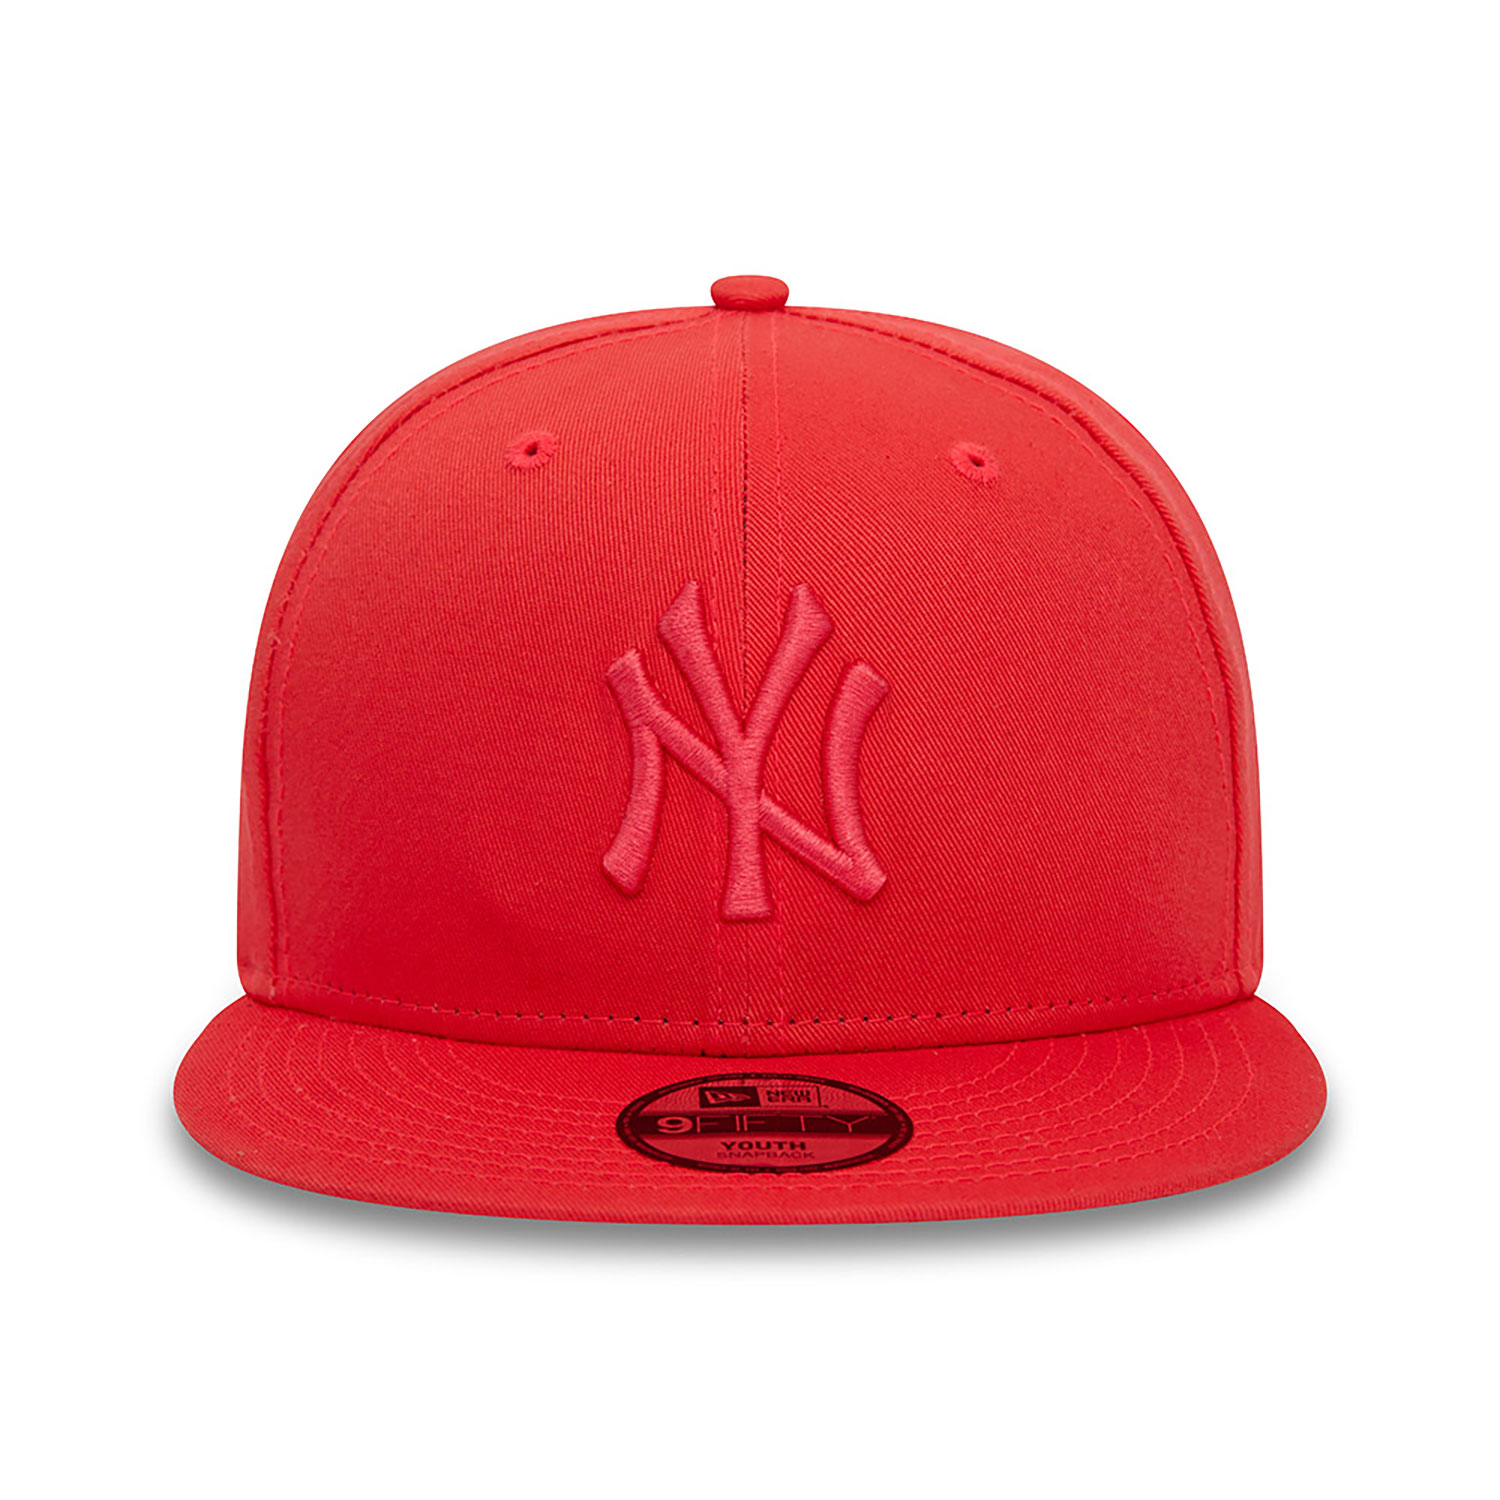 New York Yankees Youth League Essential Red 9FIFTY Adjustable Cap